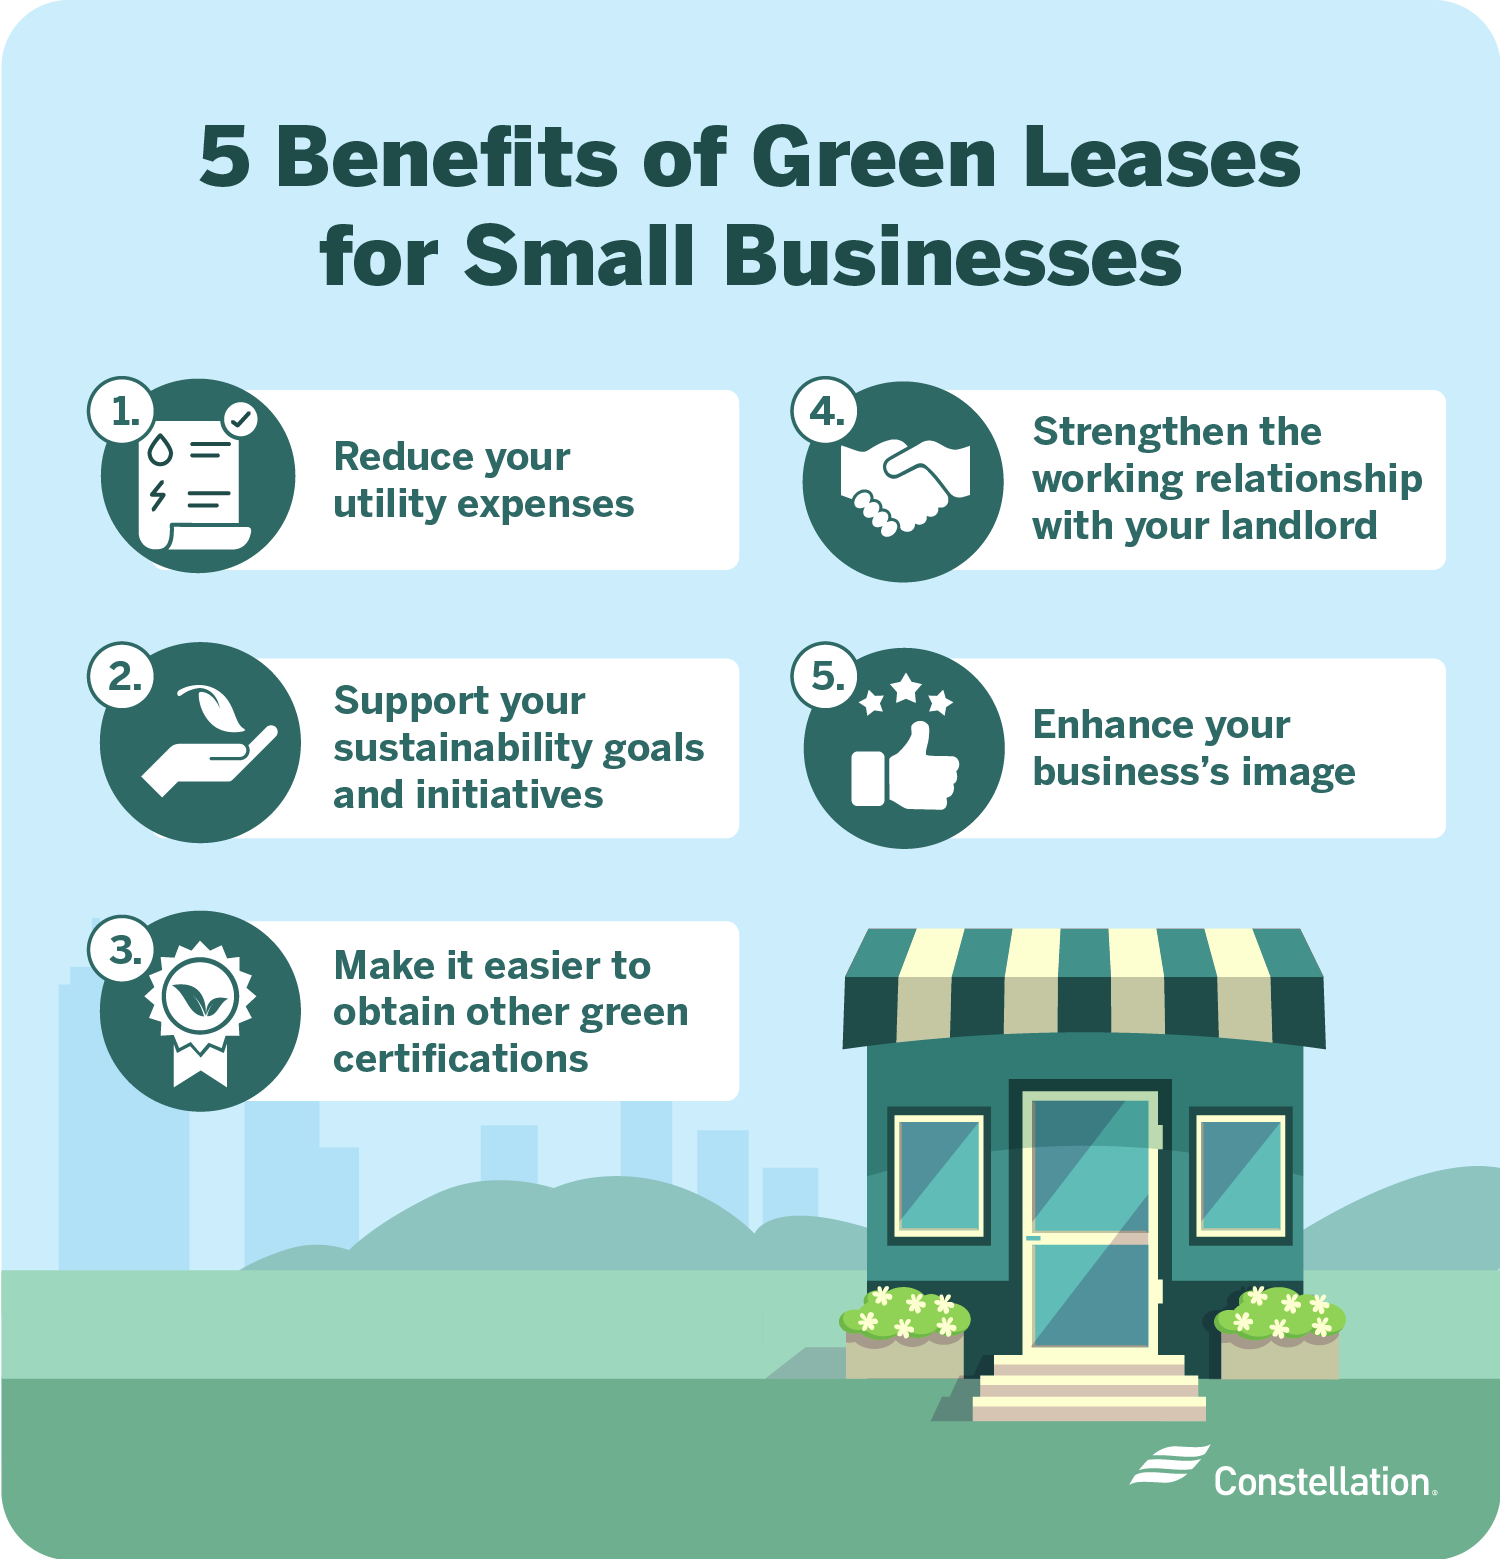 5 benefits of green leases for small businesses.